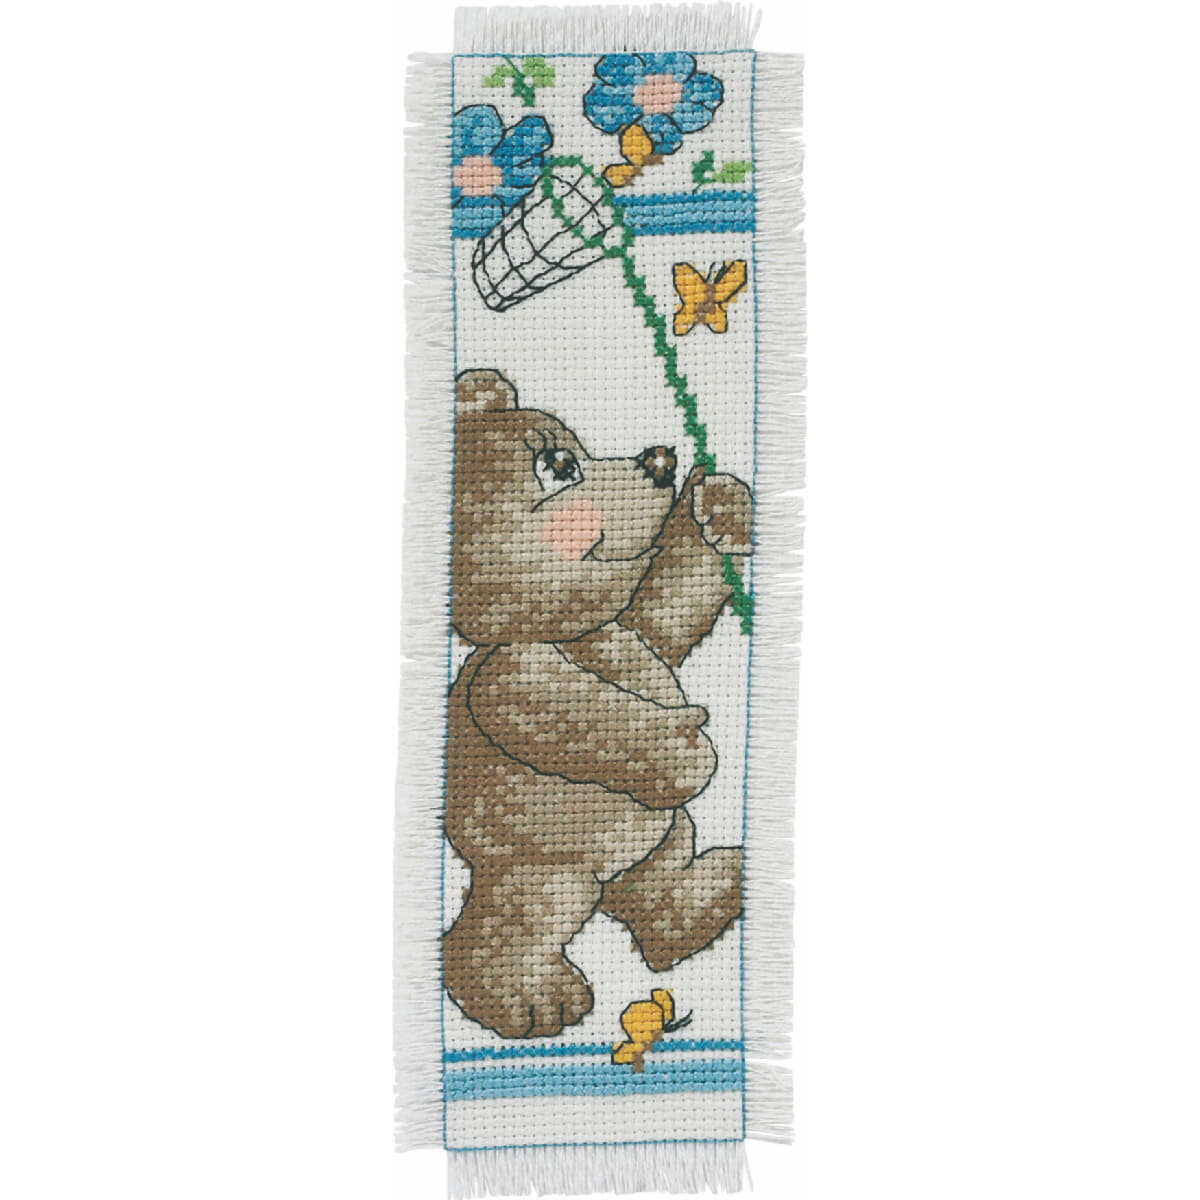 Permin counted cross stitch kit "Bookmark Teddy with...